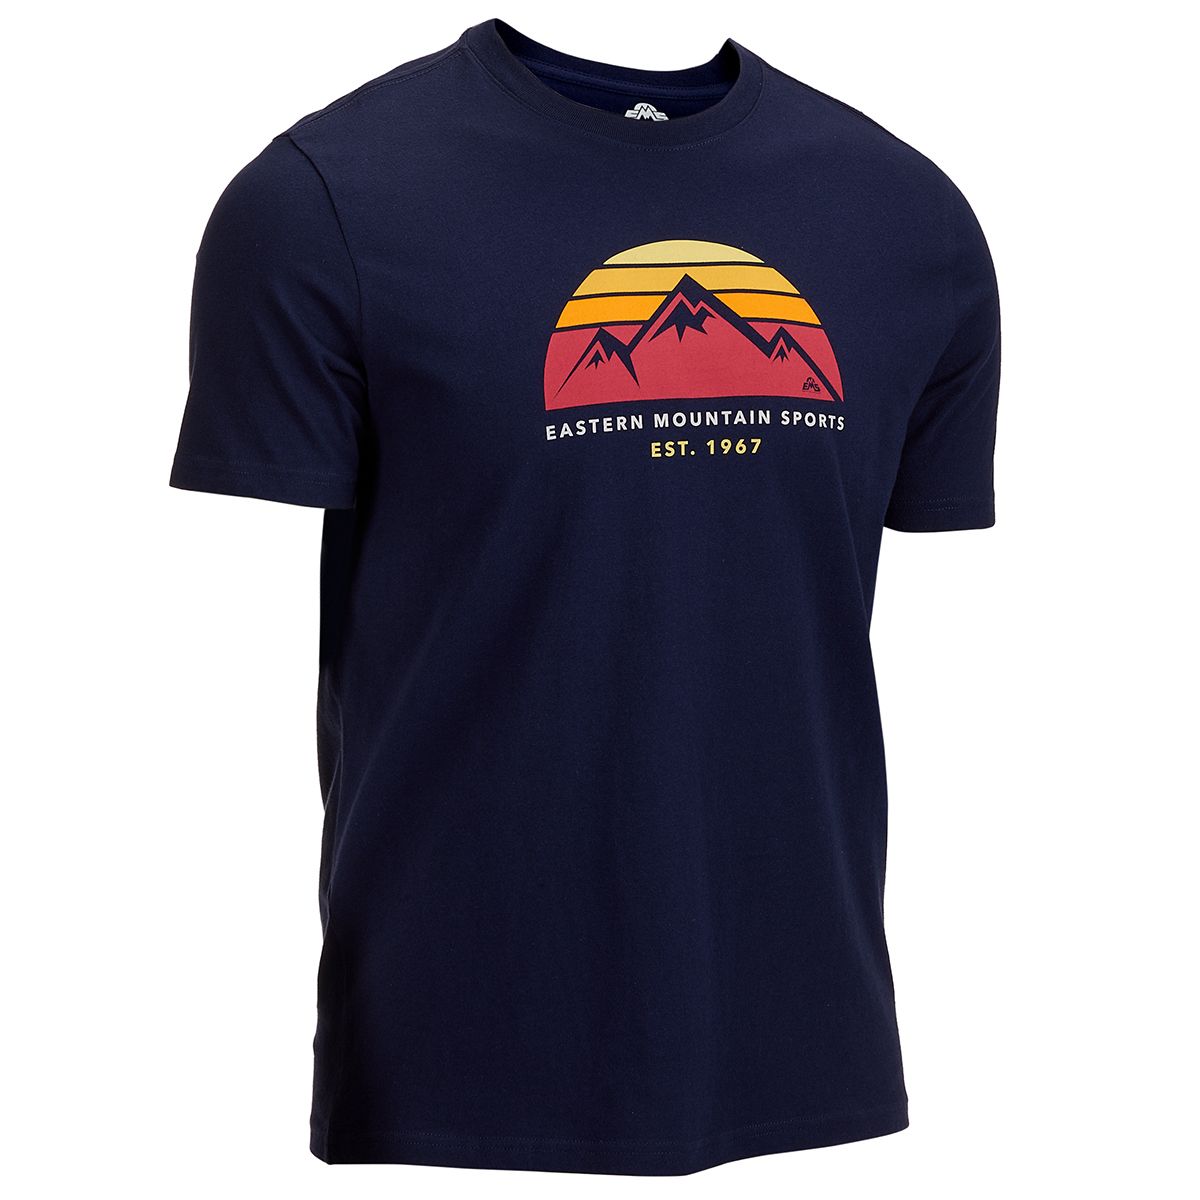 Top Graphic Tees & Our Best Pants! - Eastern Mountain Sports